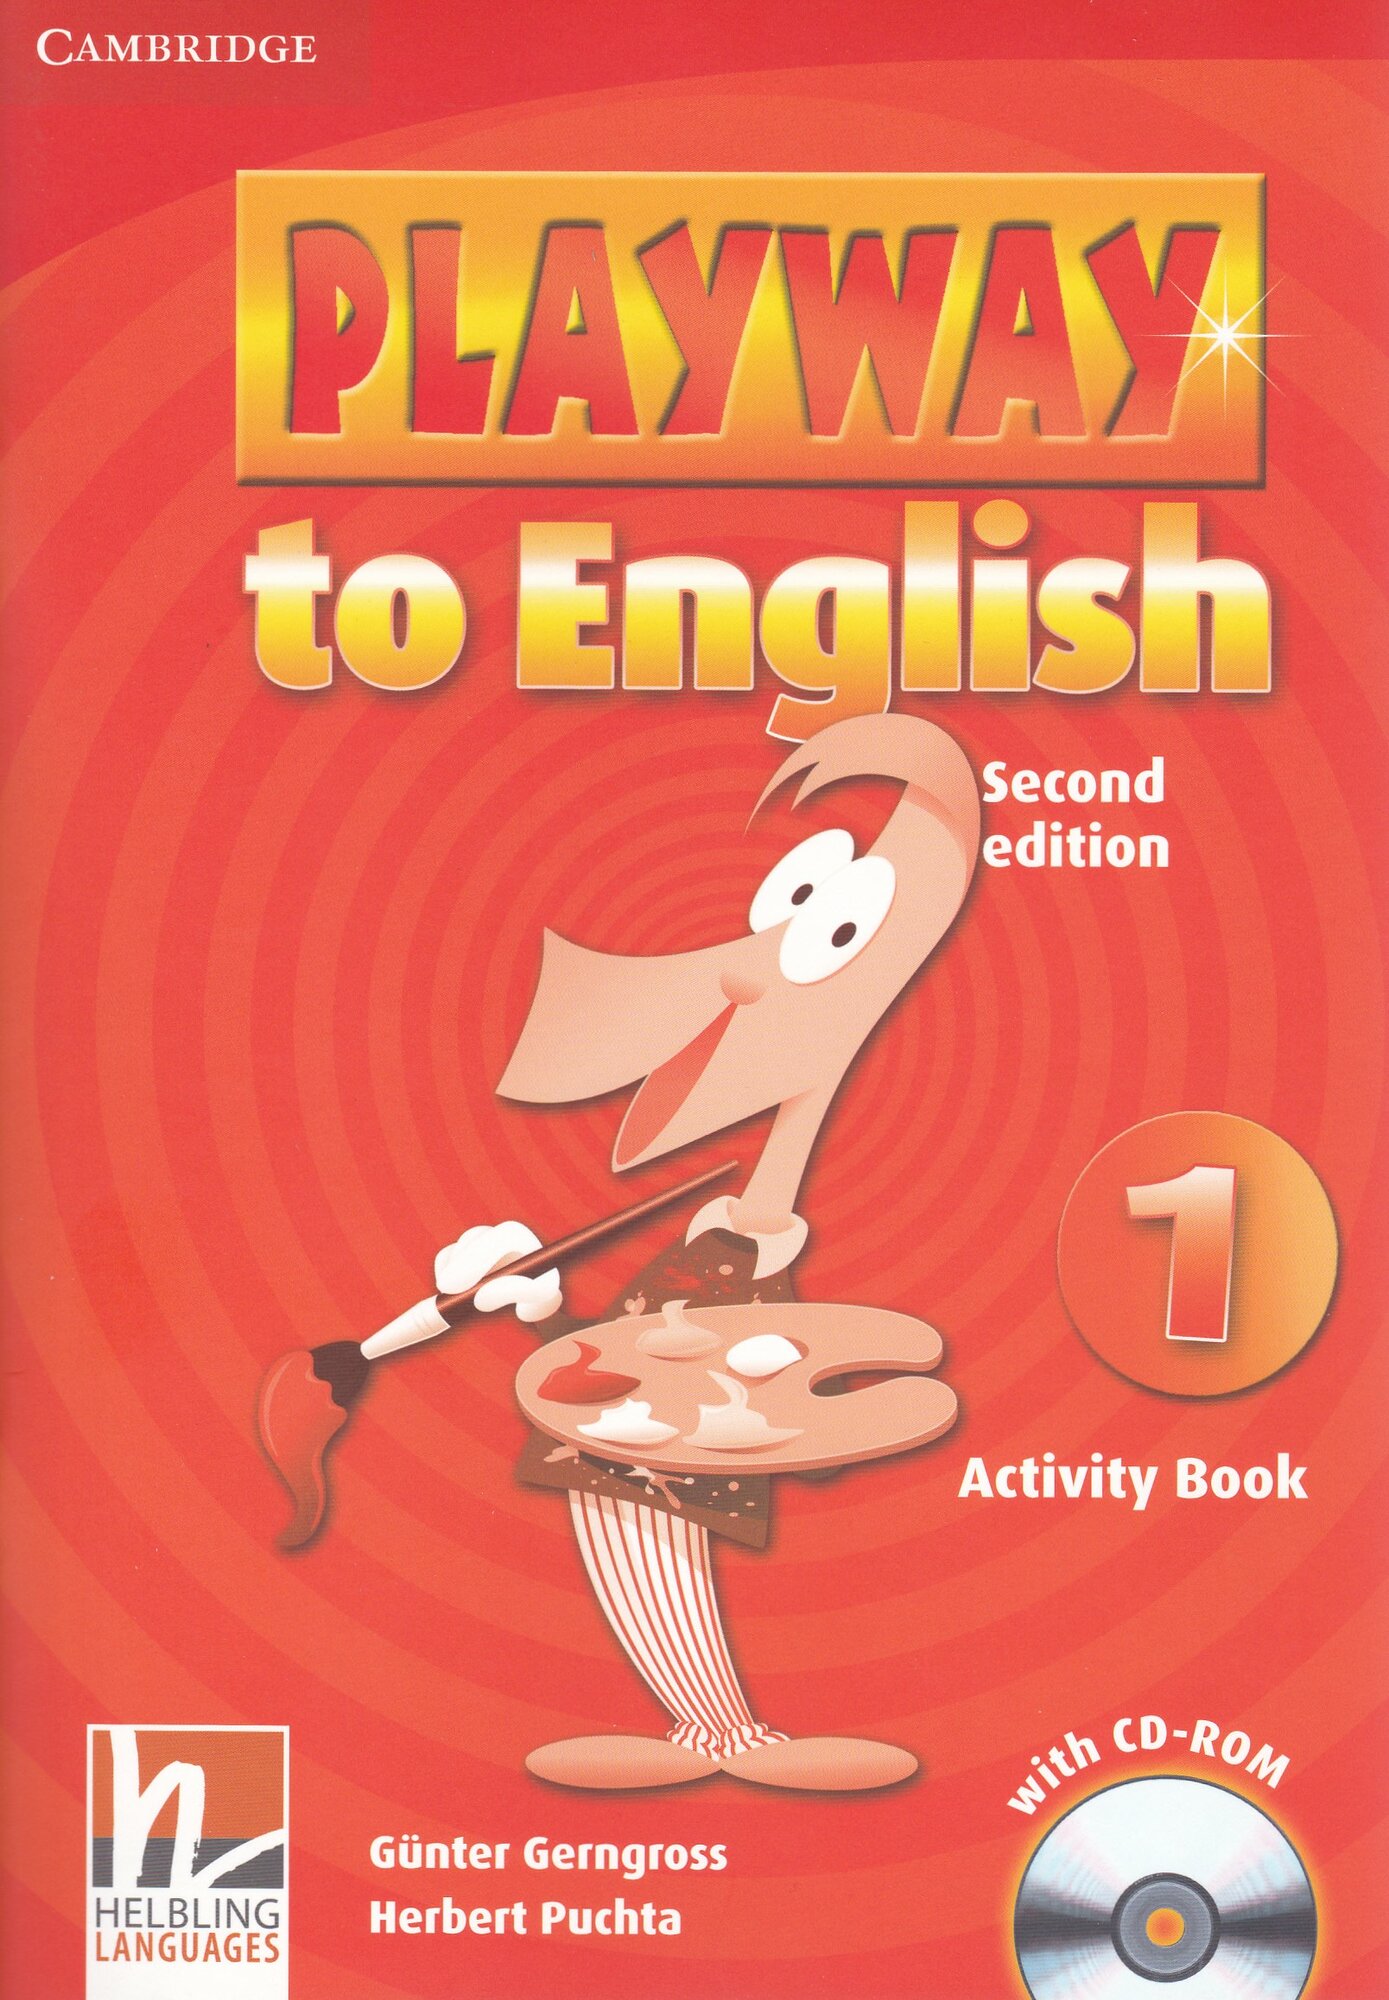 Playway to English Second Edition 1 Activity Book with CD-ROM